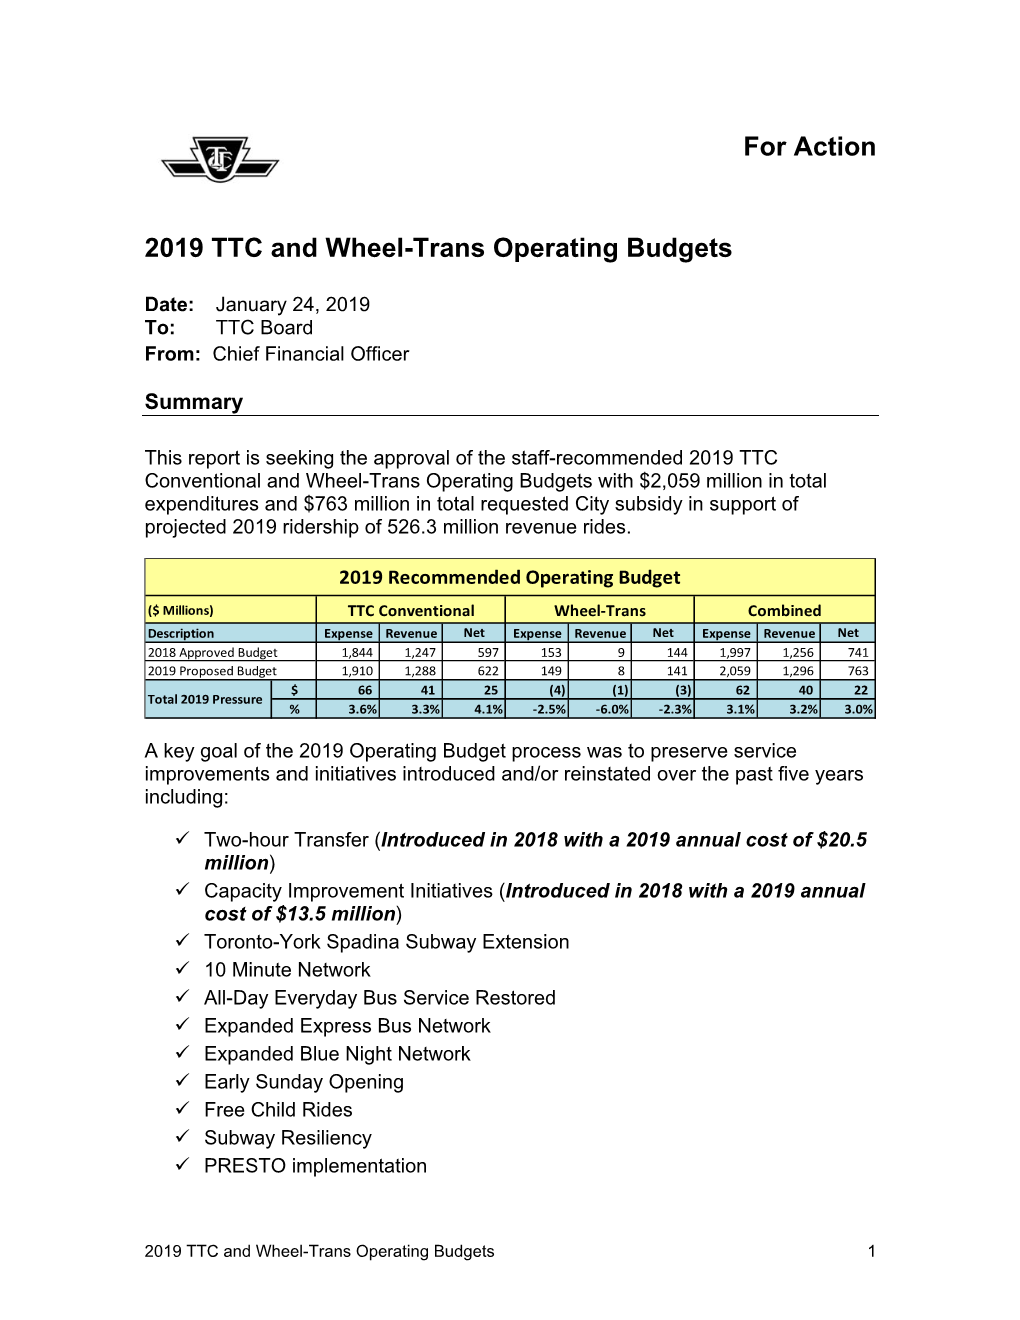 For Action 2019 TTC and Wheel-Trans Operating Budgets